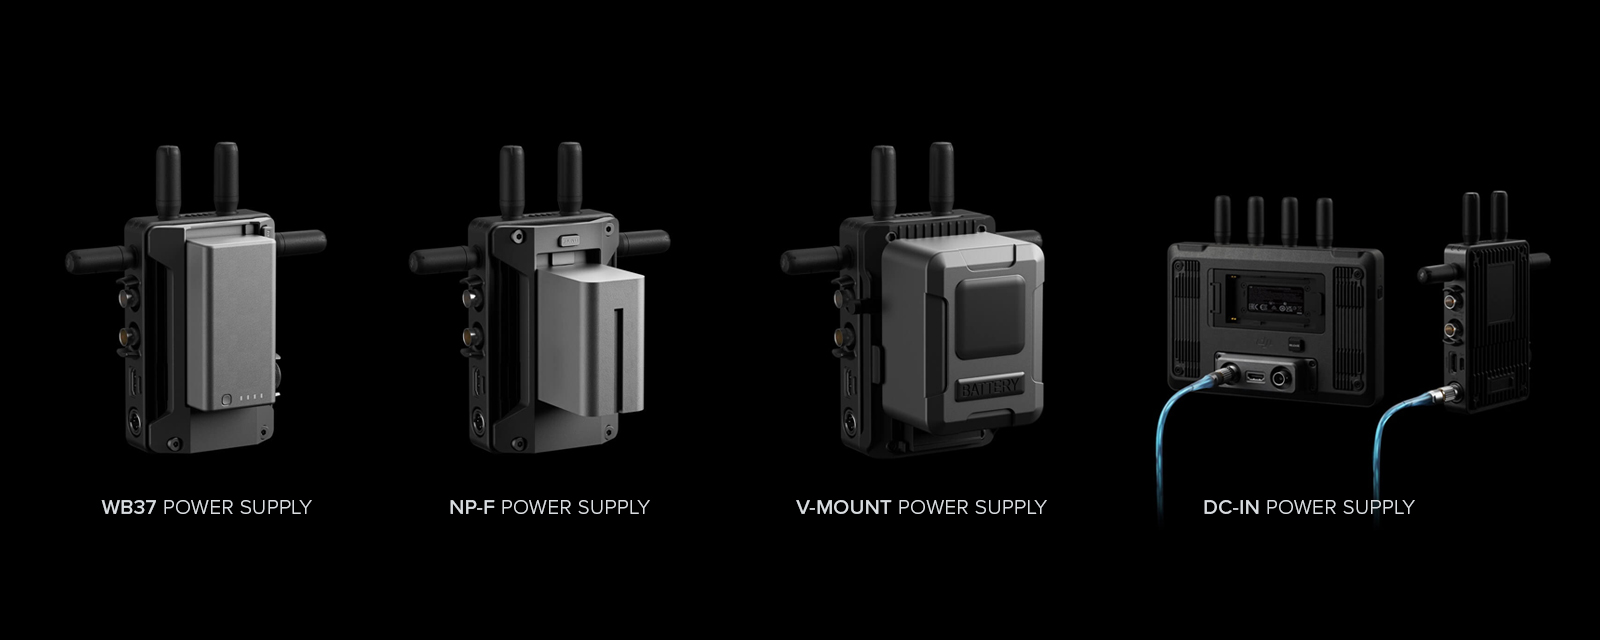 DJI Transmission - Power Your Creativity | Best Price Guarantee at D1 Store